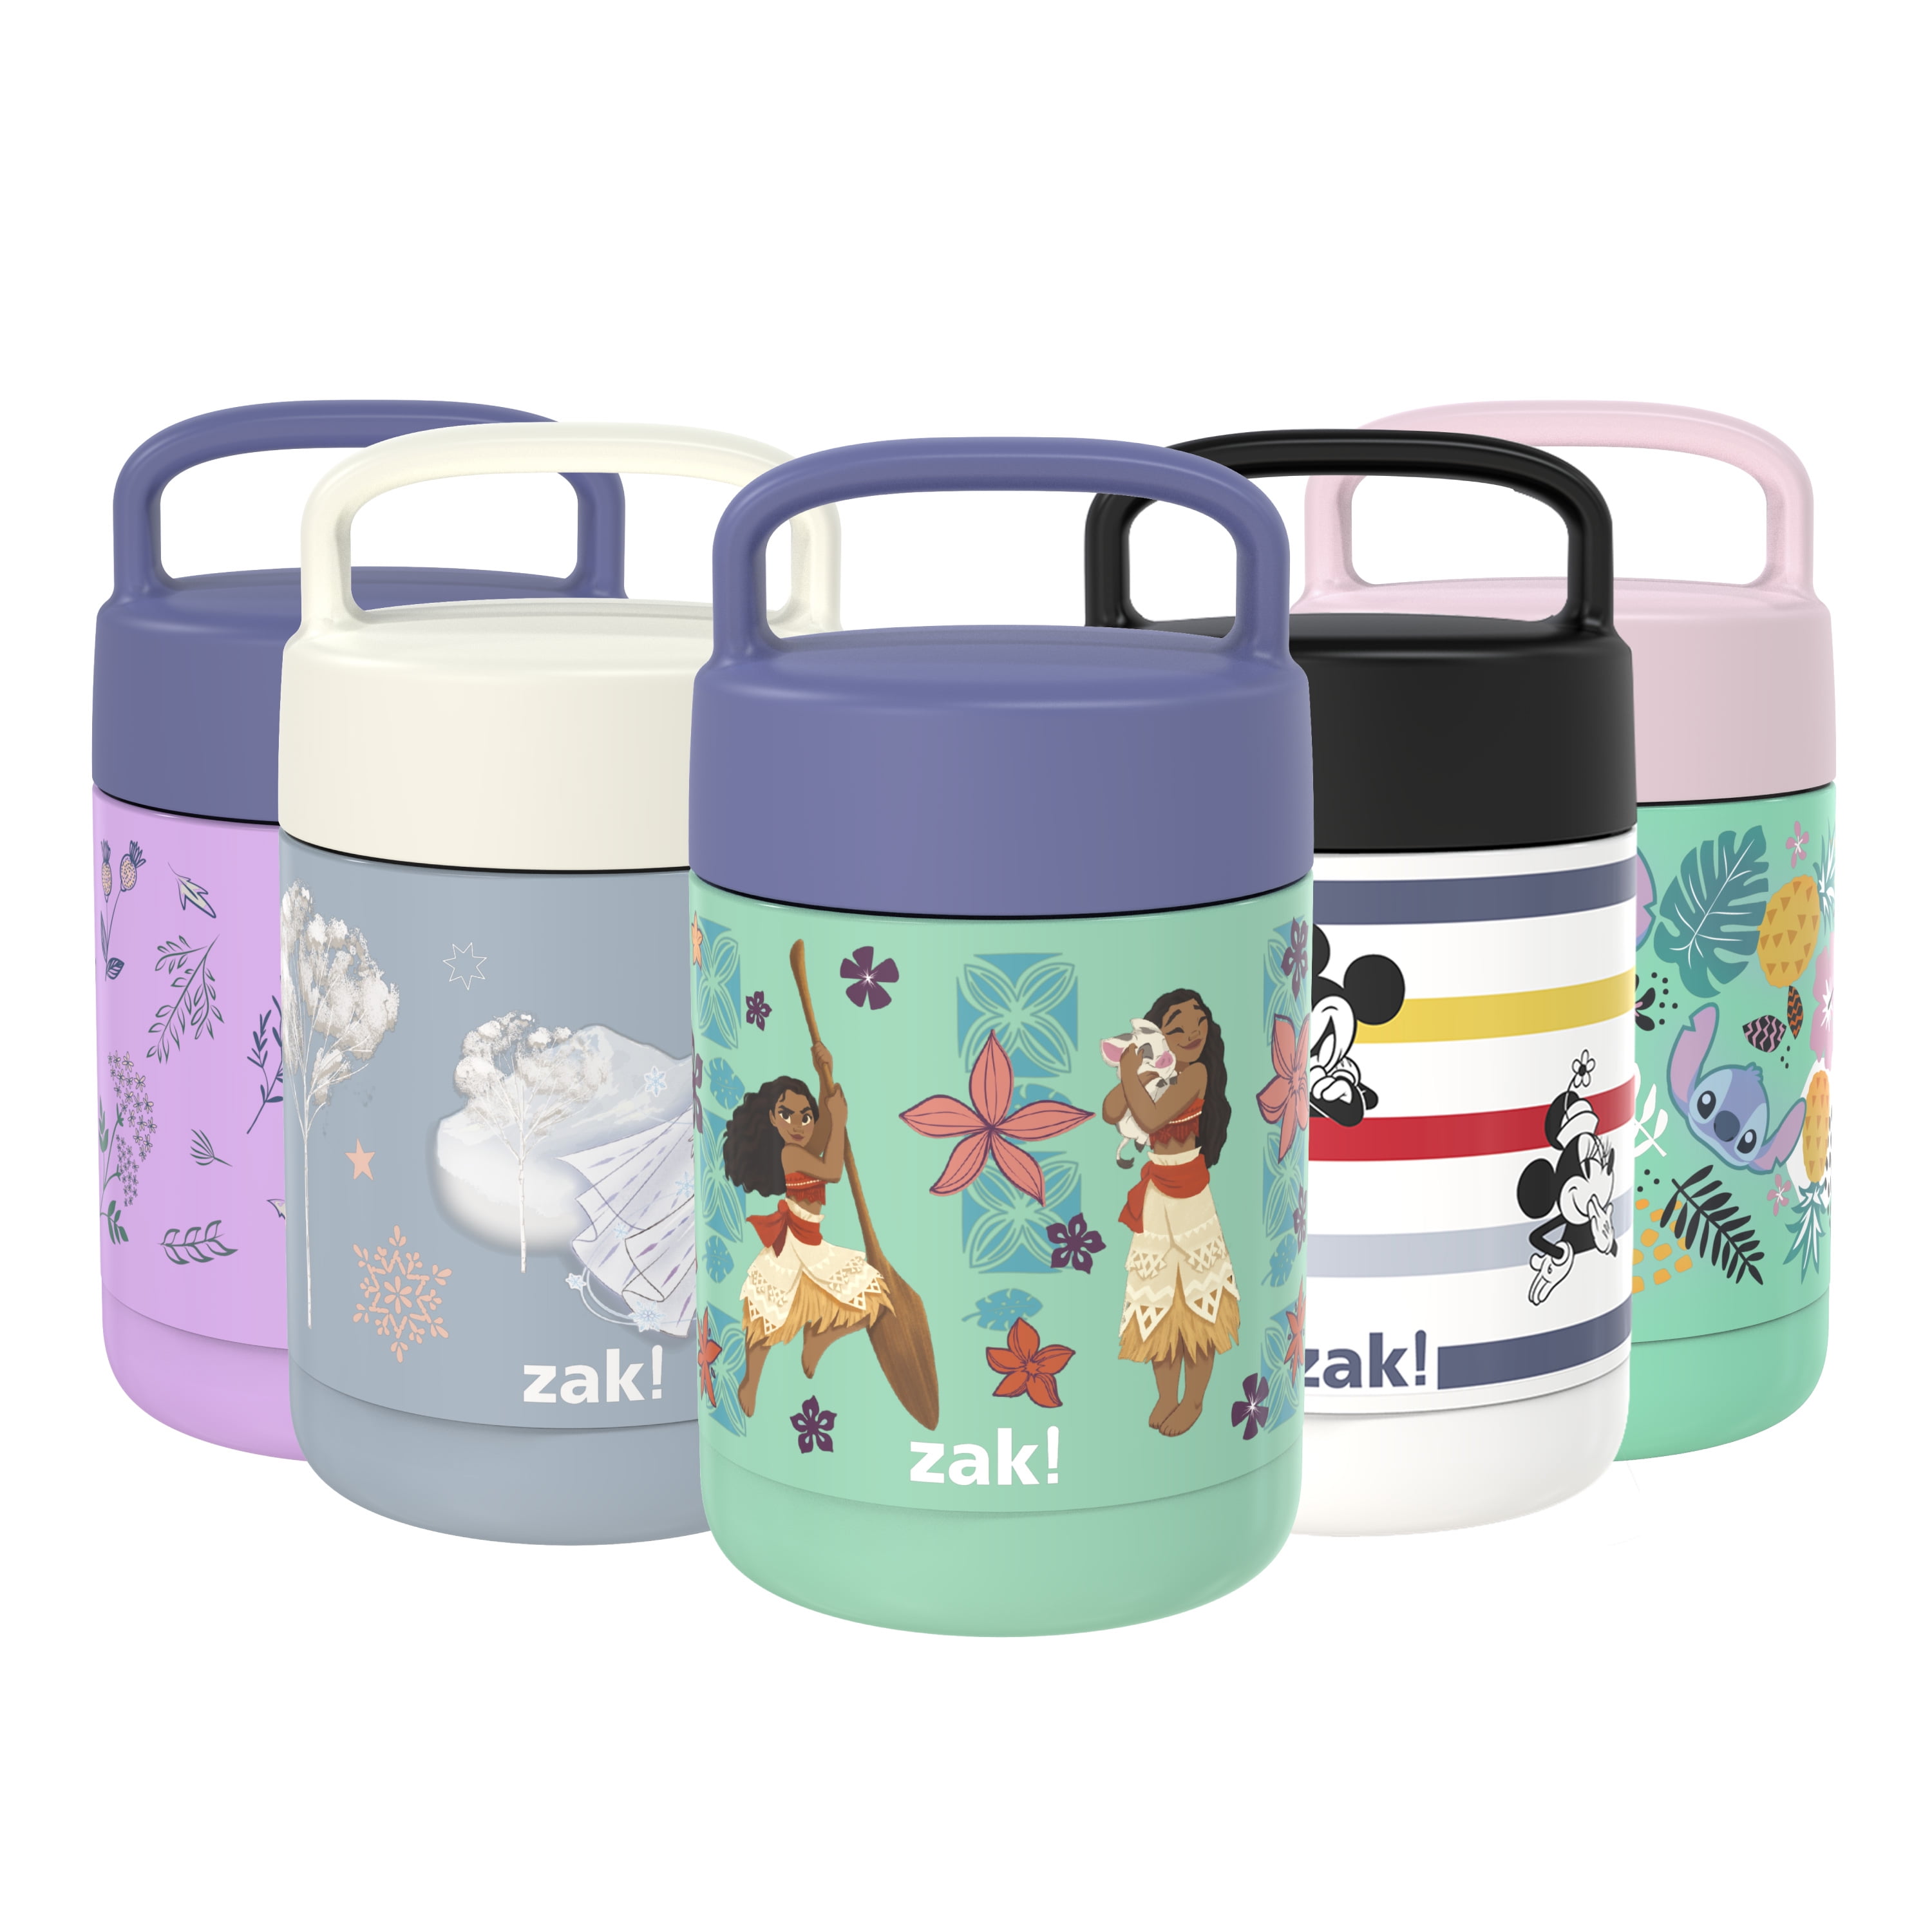 3 ZAK SNACK CONTAINERS & LIDS Disney Fairies Girls School Lunch Cup Travel NEW 